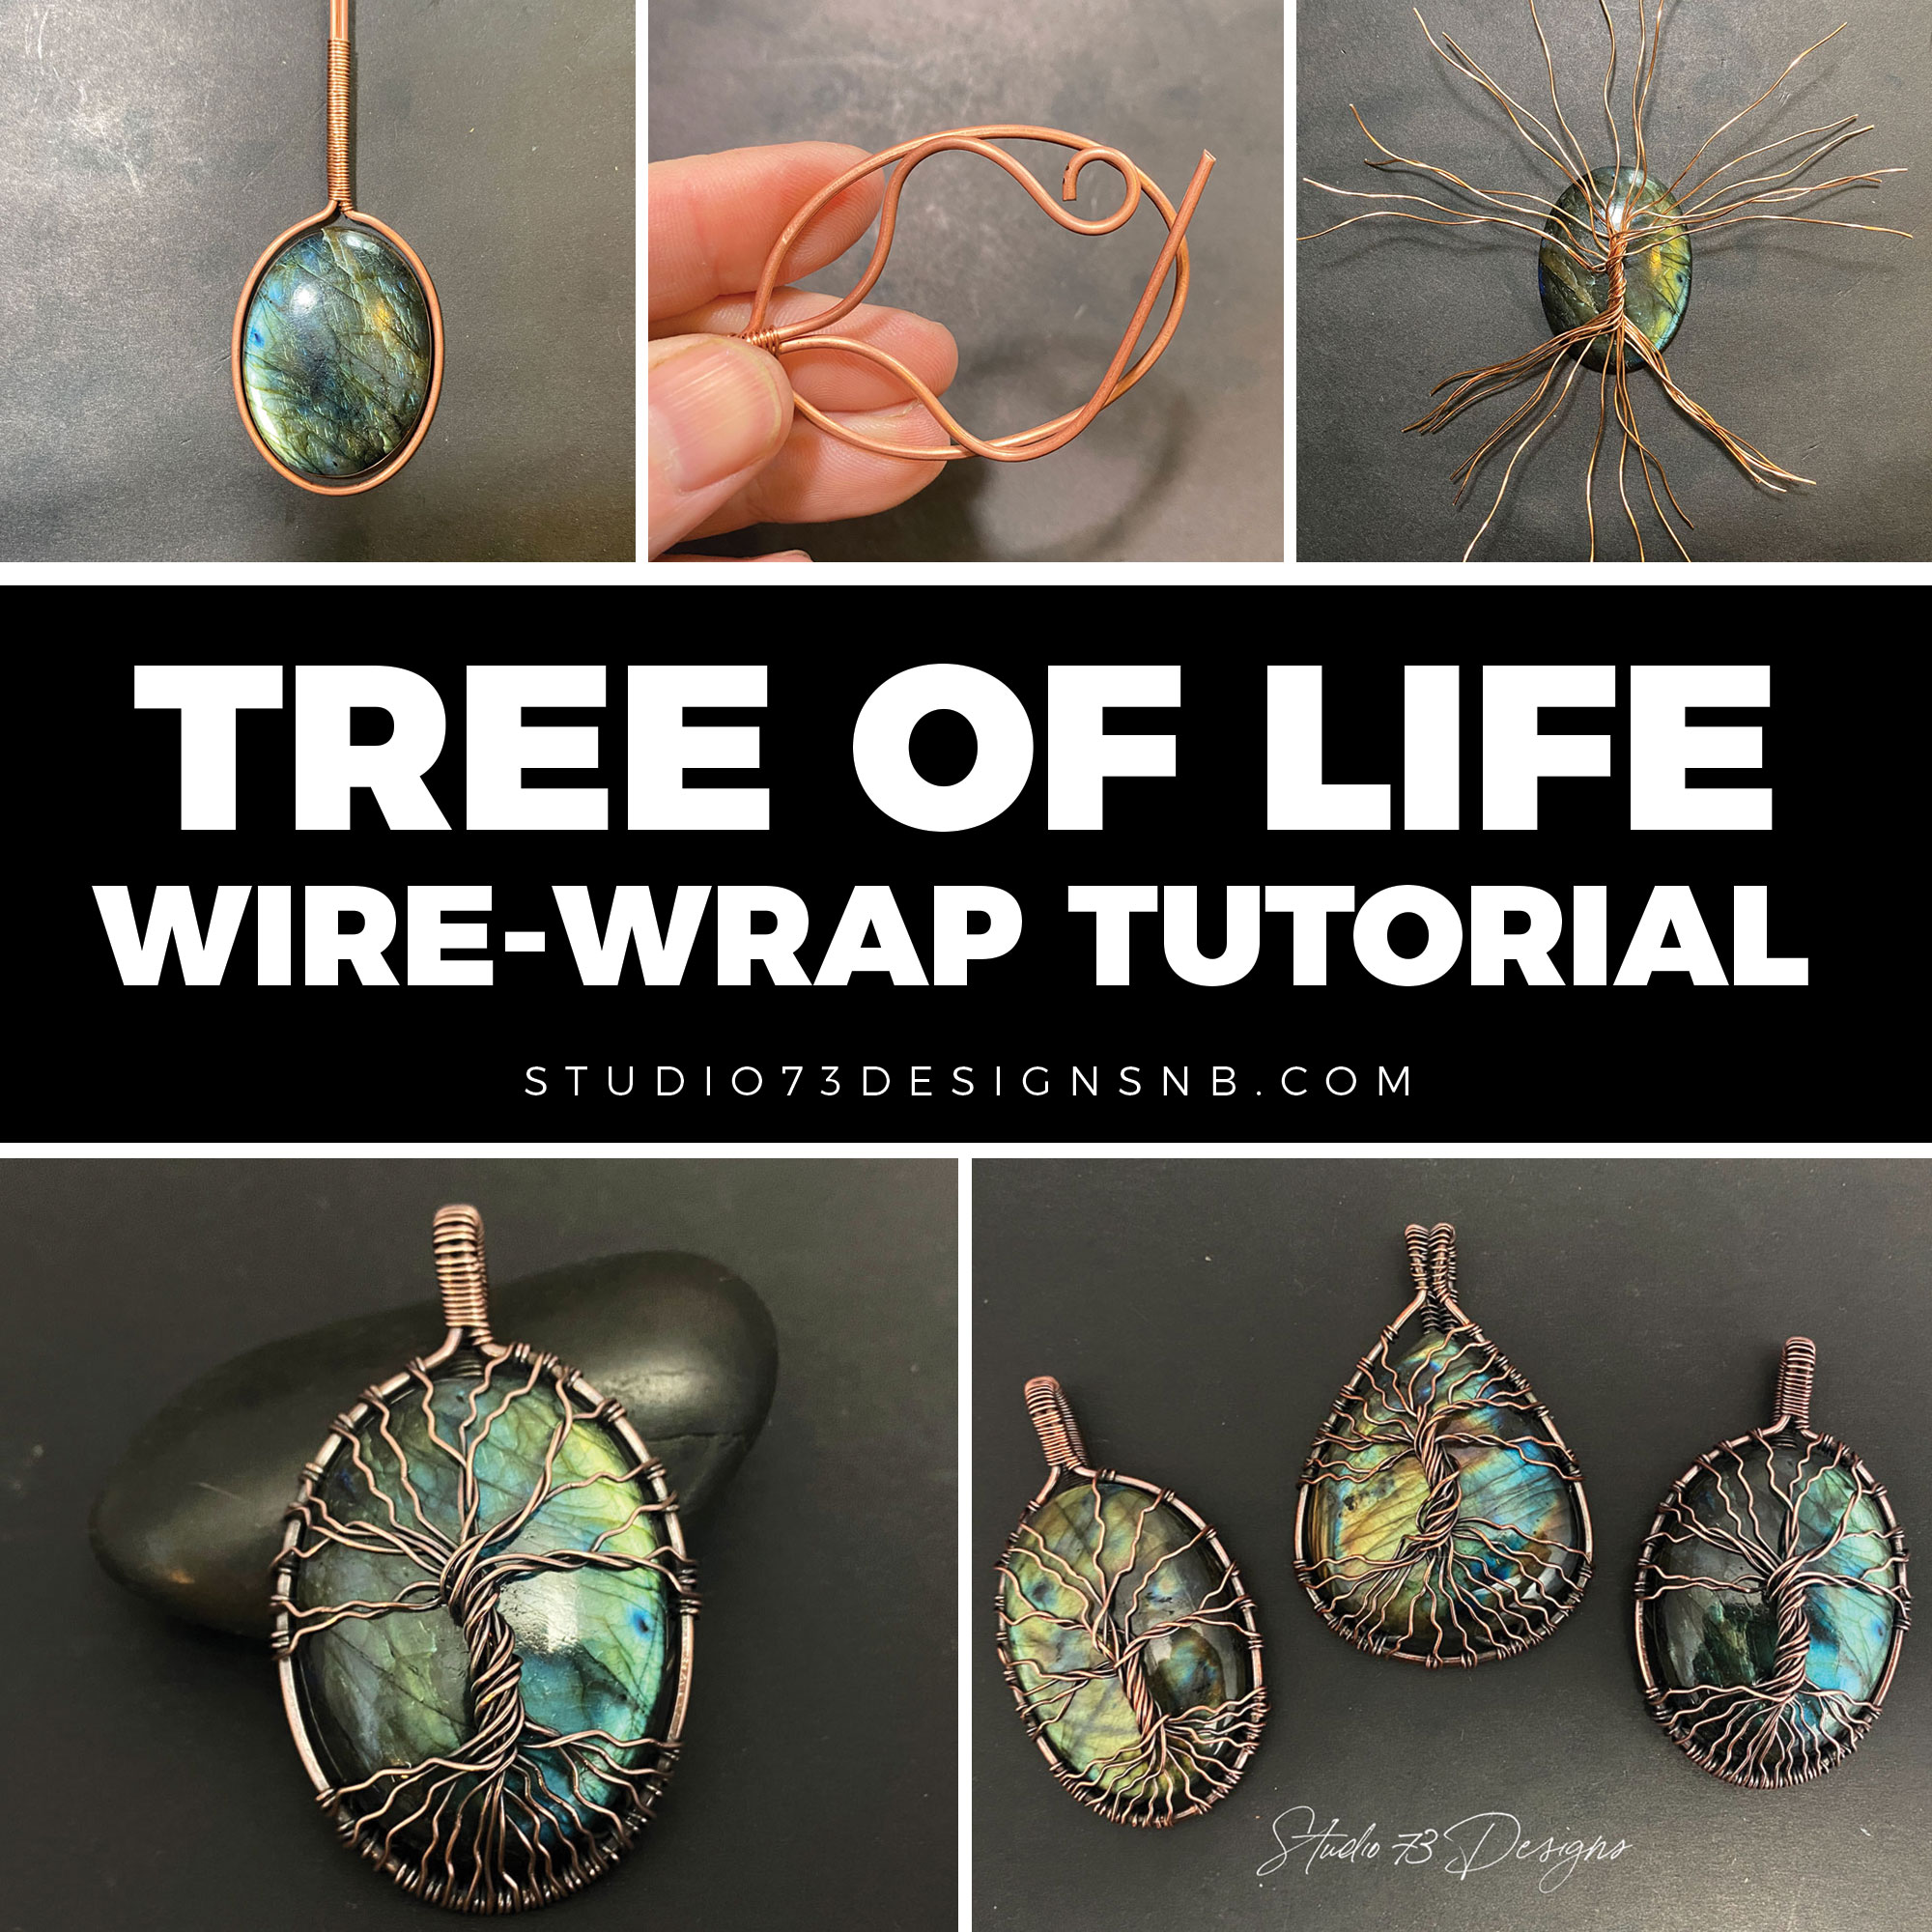 Tree of Life Wire-Wrap Tutorial